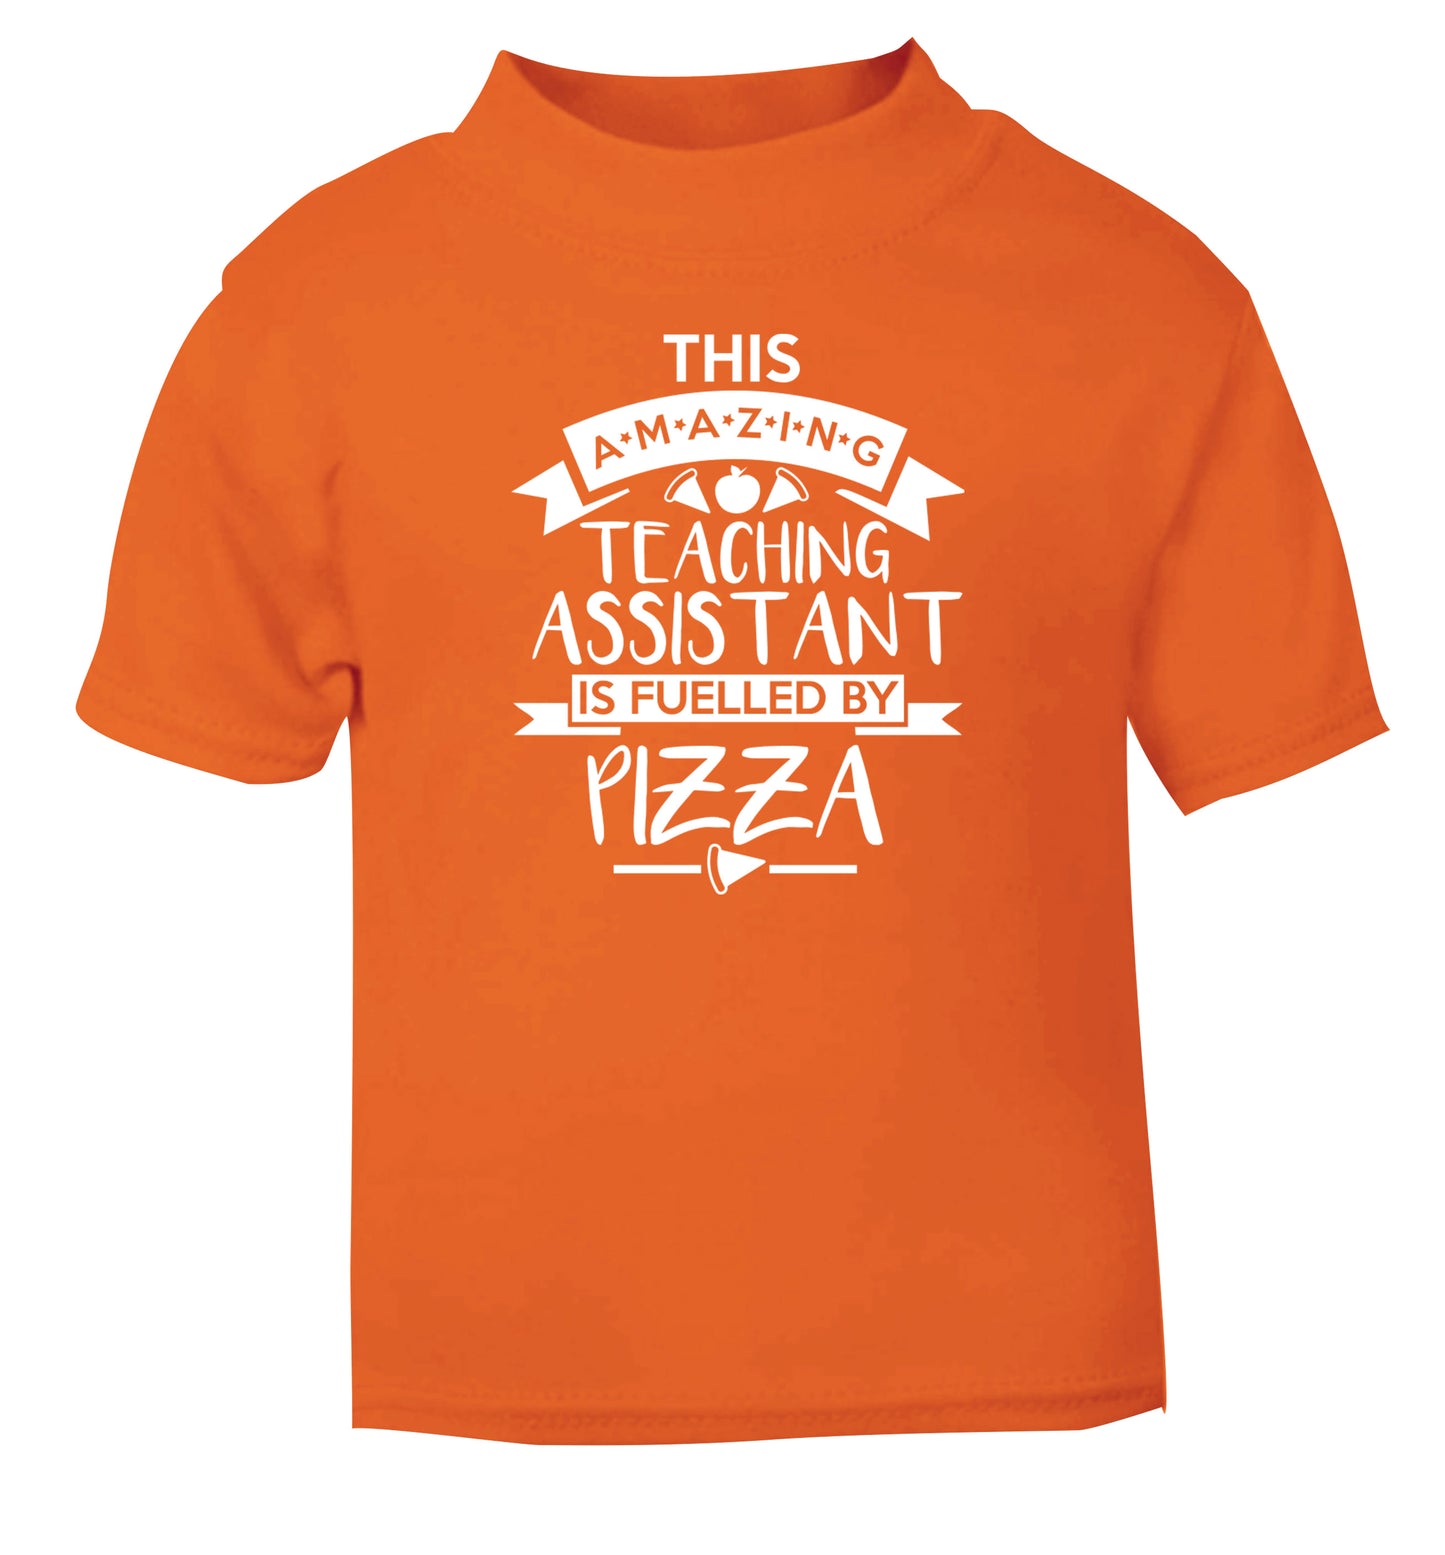 This amazing teaching assistant is fuelled by pizza orange Baby Toddler Tshirt 2 Years